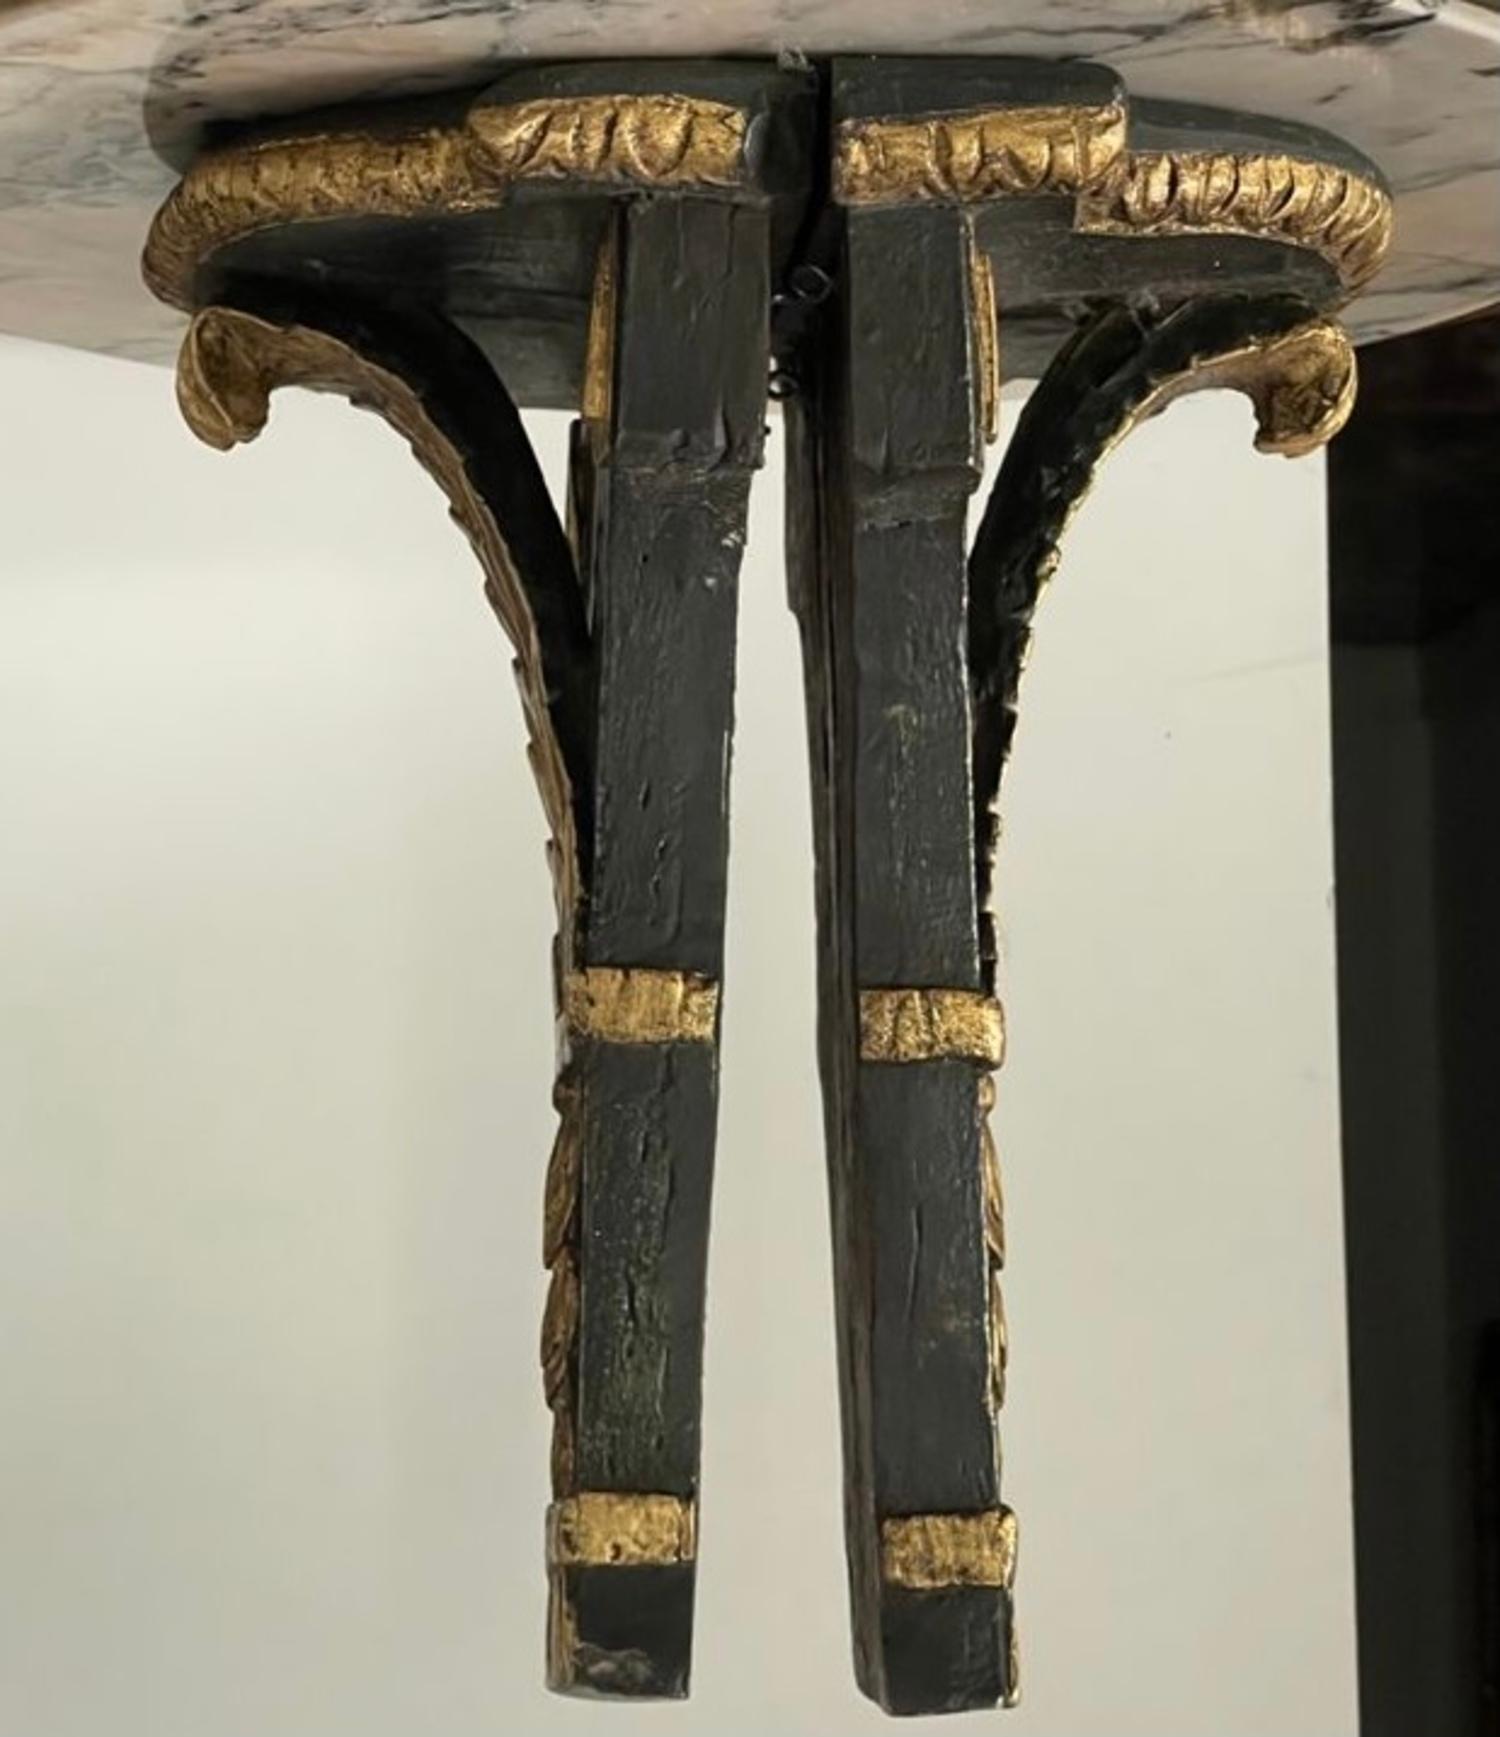 Pair of Spanish wall brackets, neoclassical period, in carved and gilded wood, in contrast to ebonized wood, decoration of plant and geometric motifs, perfect to put objects or vases on them.